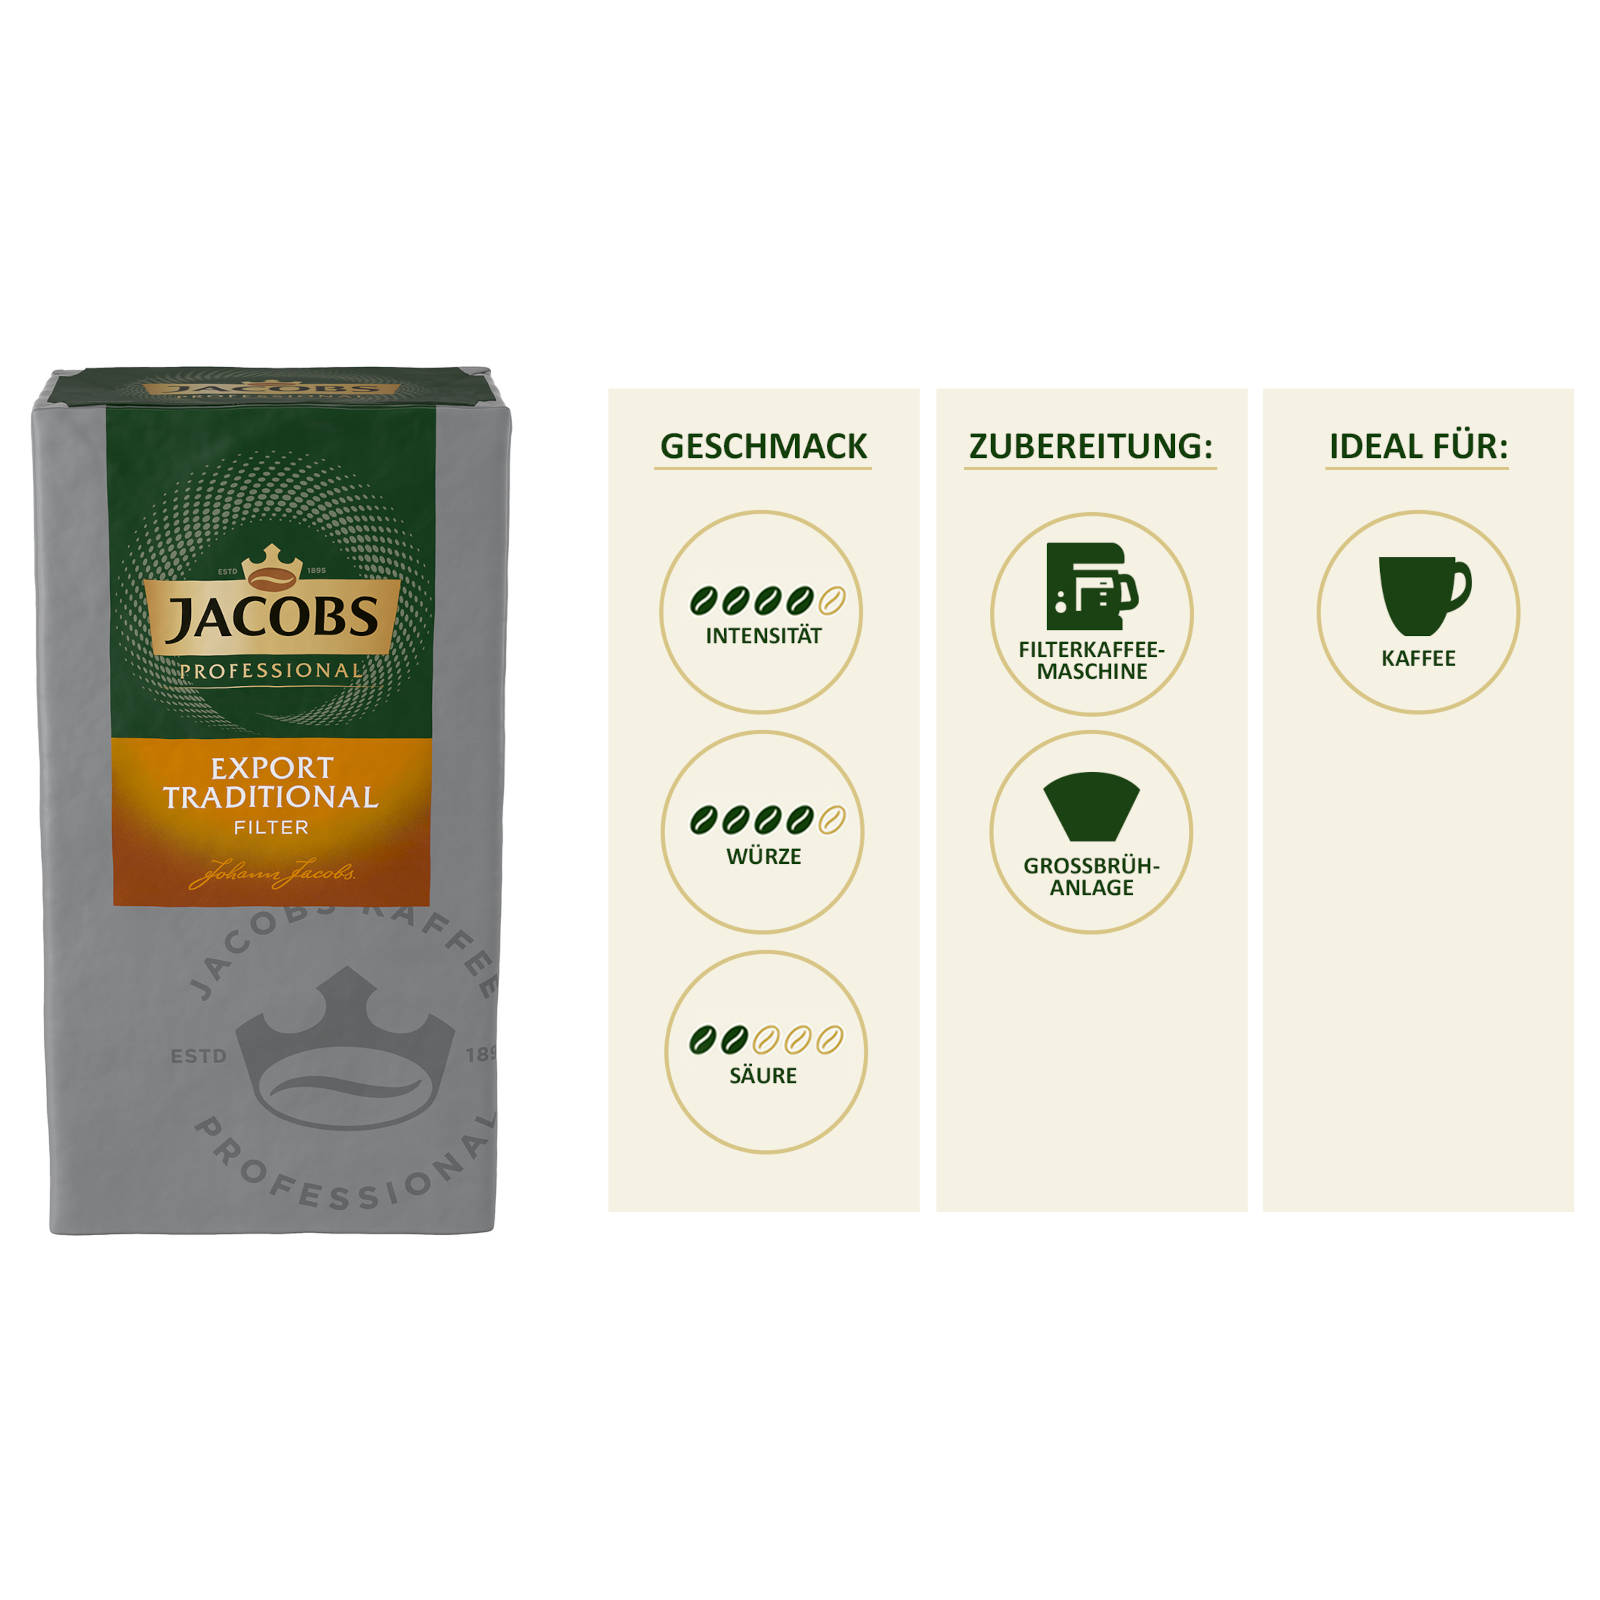 JACOBS Professional Export Traditional (Filter, 12x500 Filterkaffee Press) French g